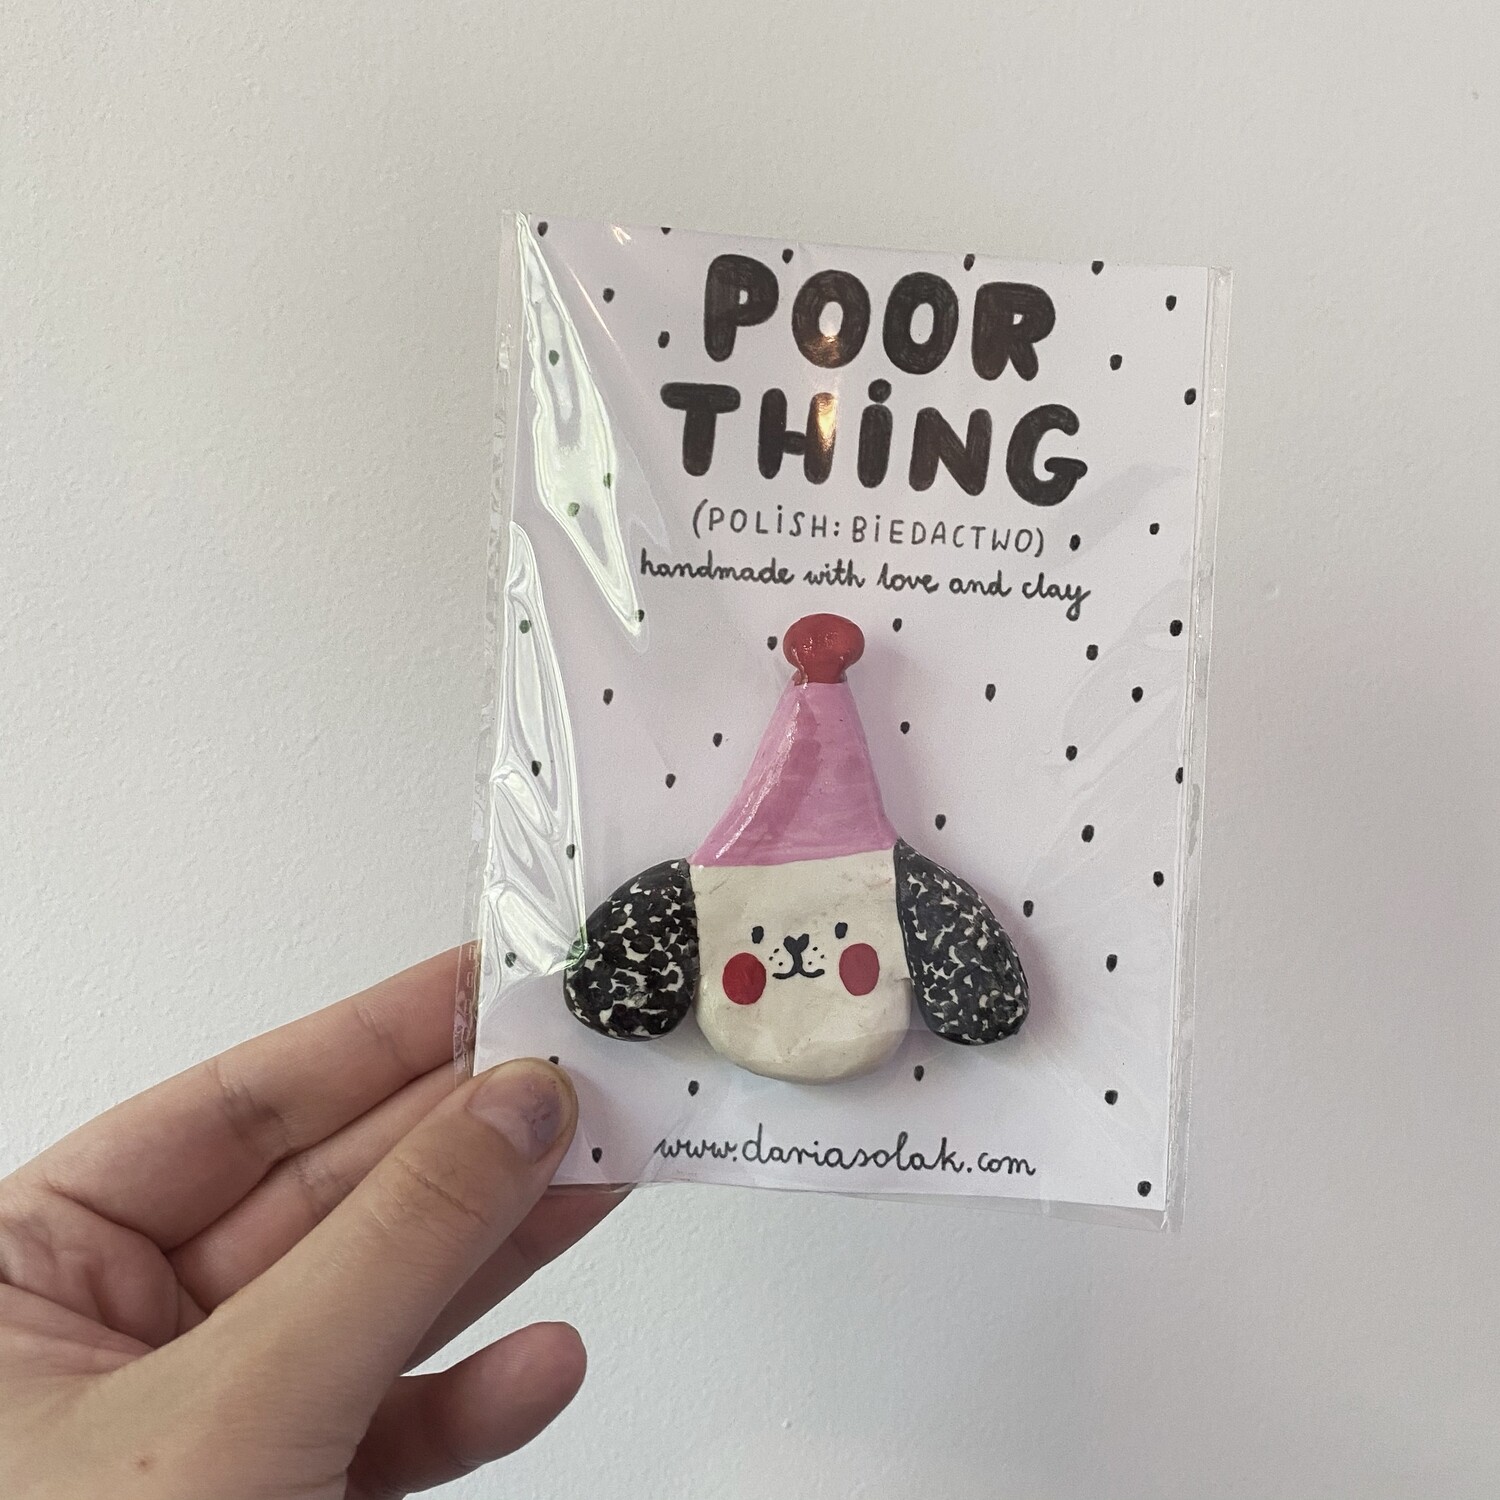 POOR THING party dog pin